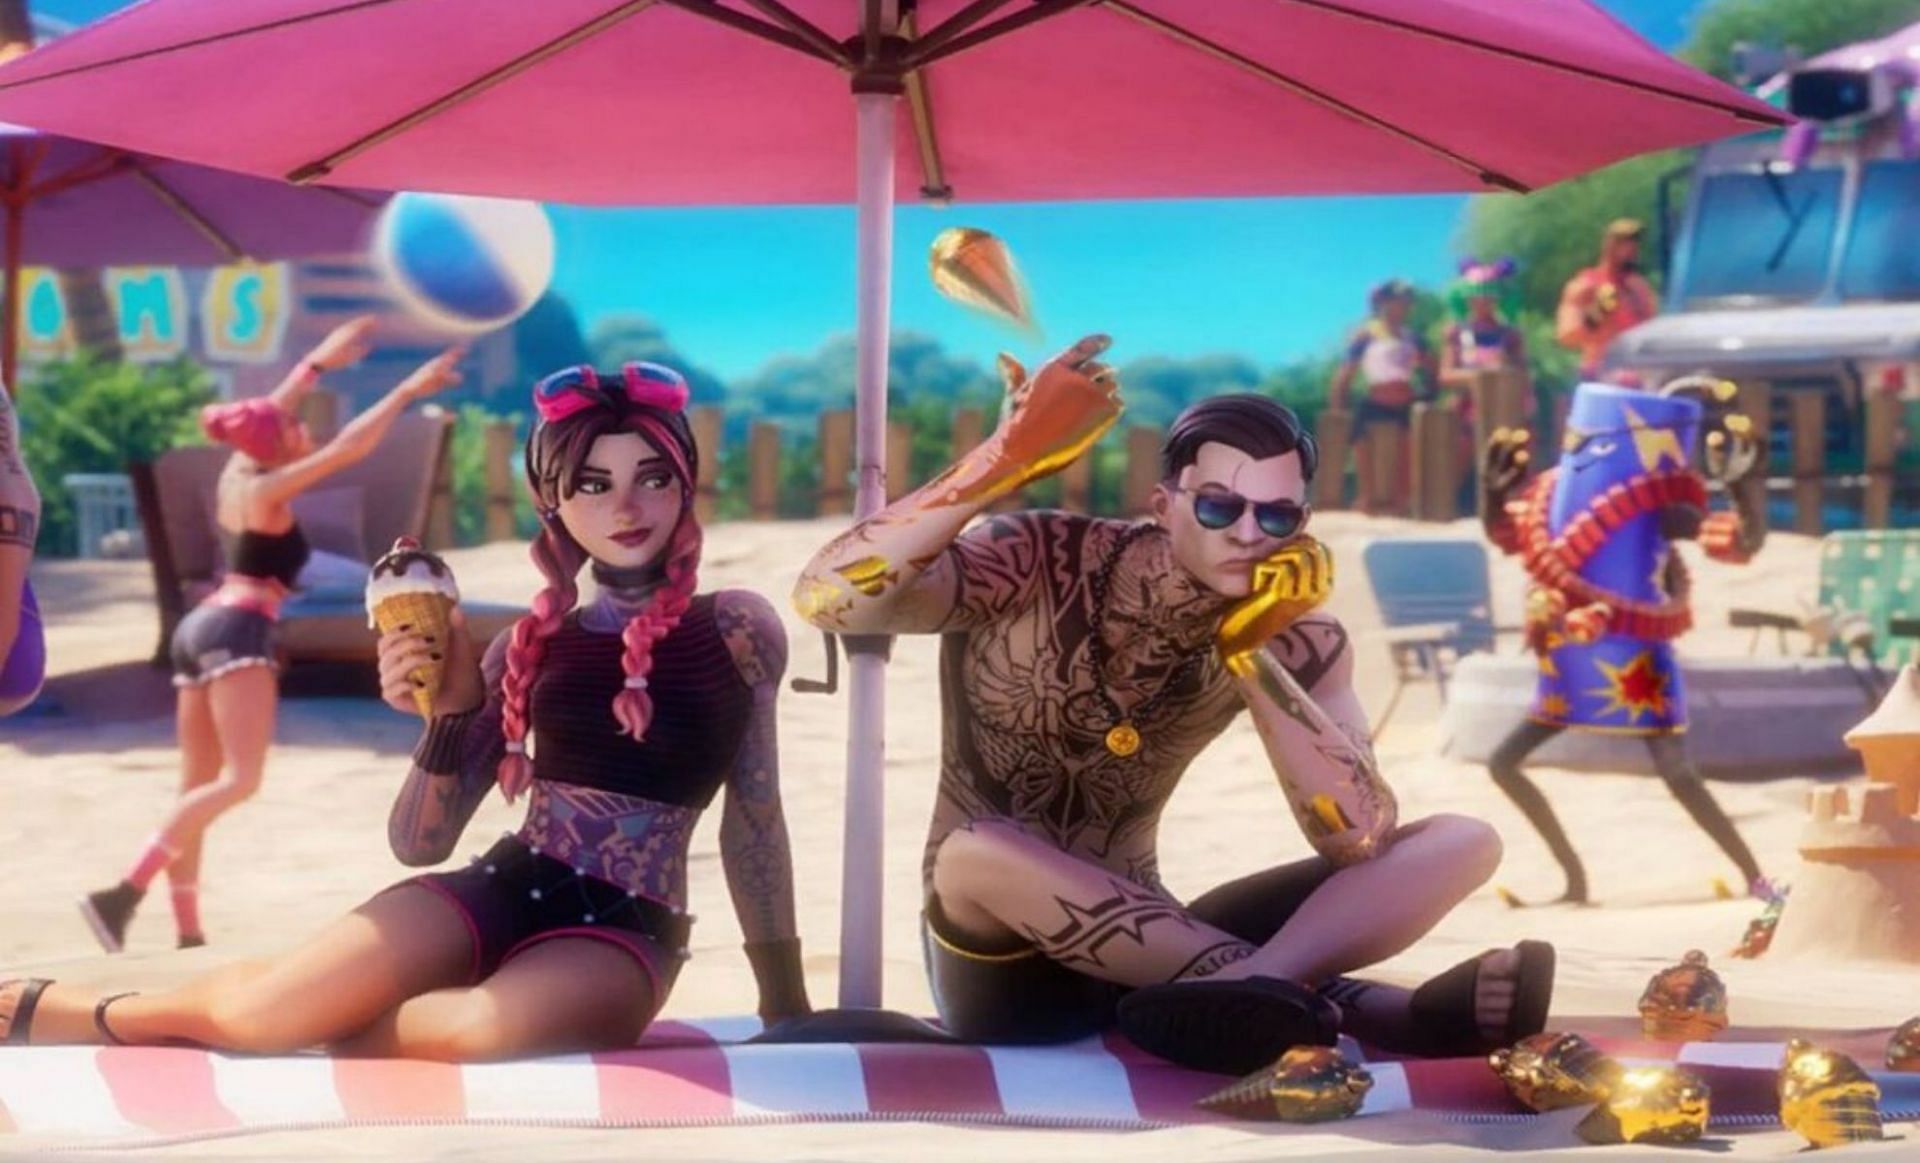 Beach Jules on the left (Image via Epic Games)